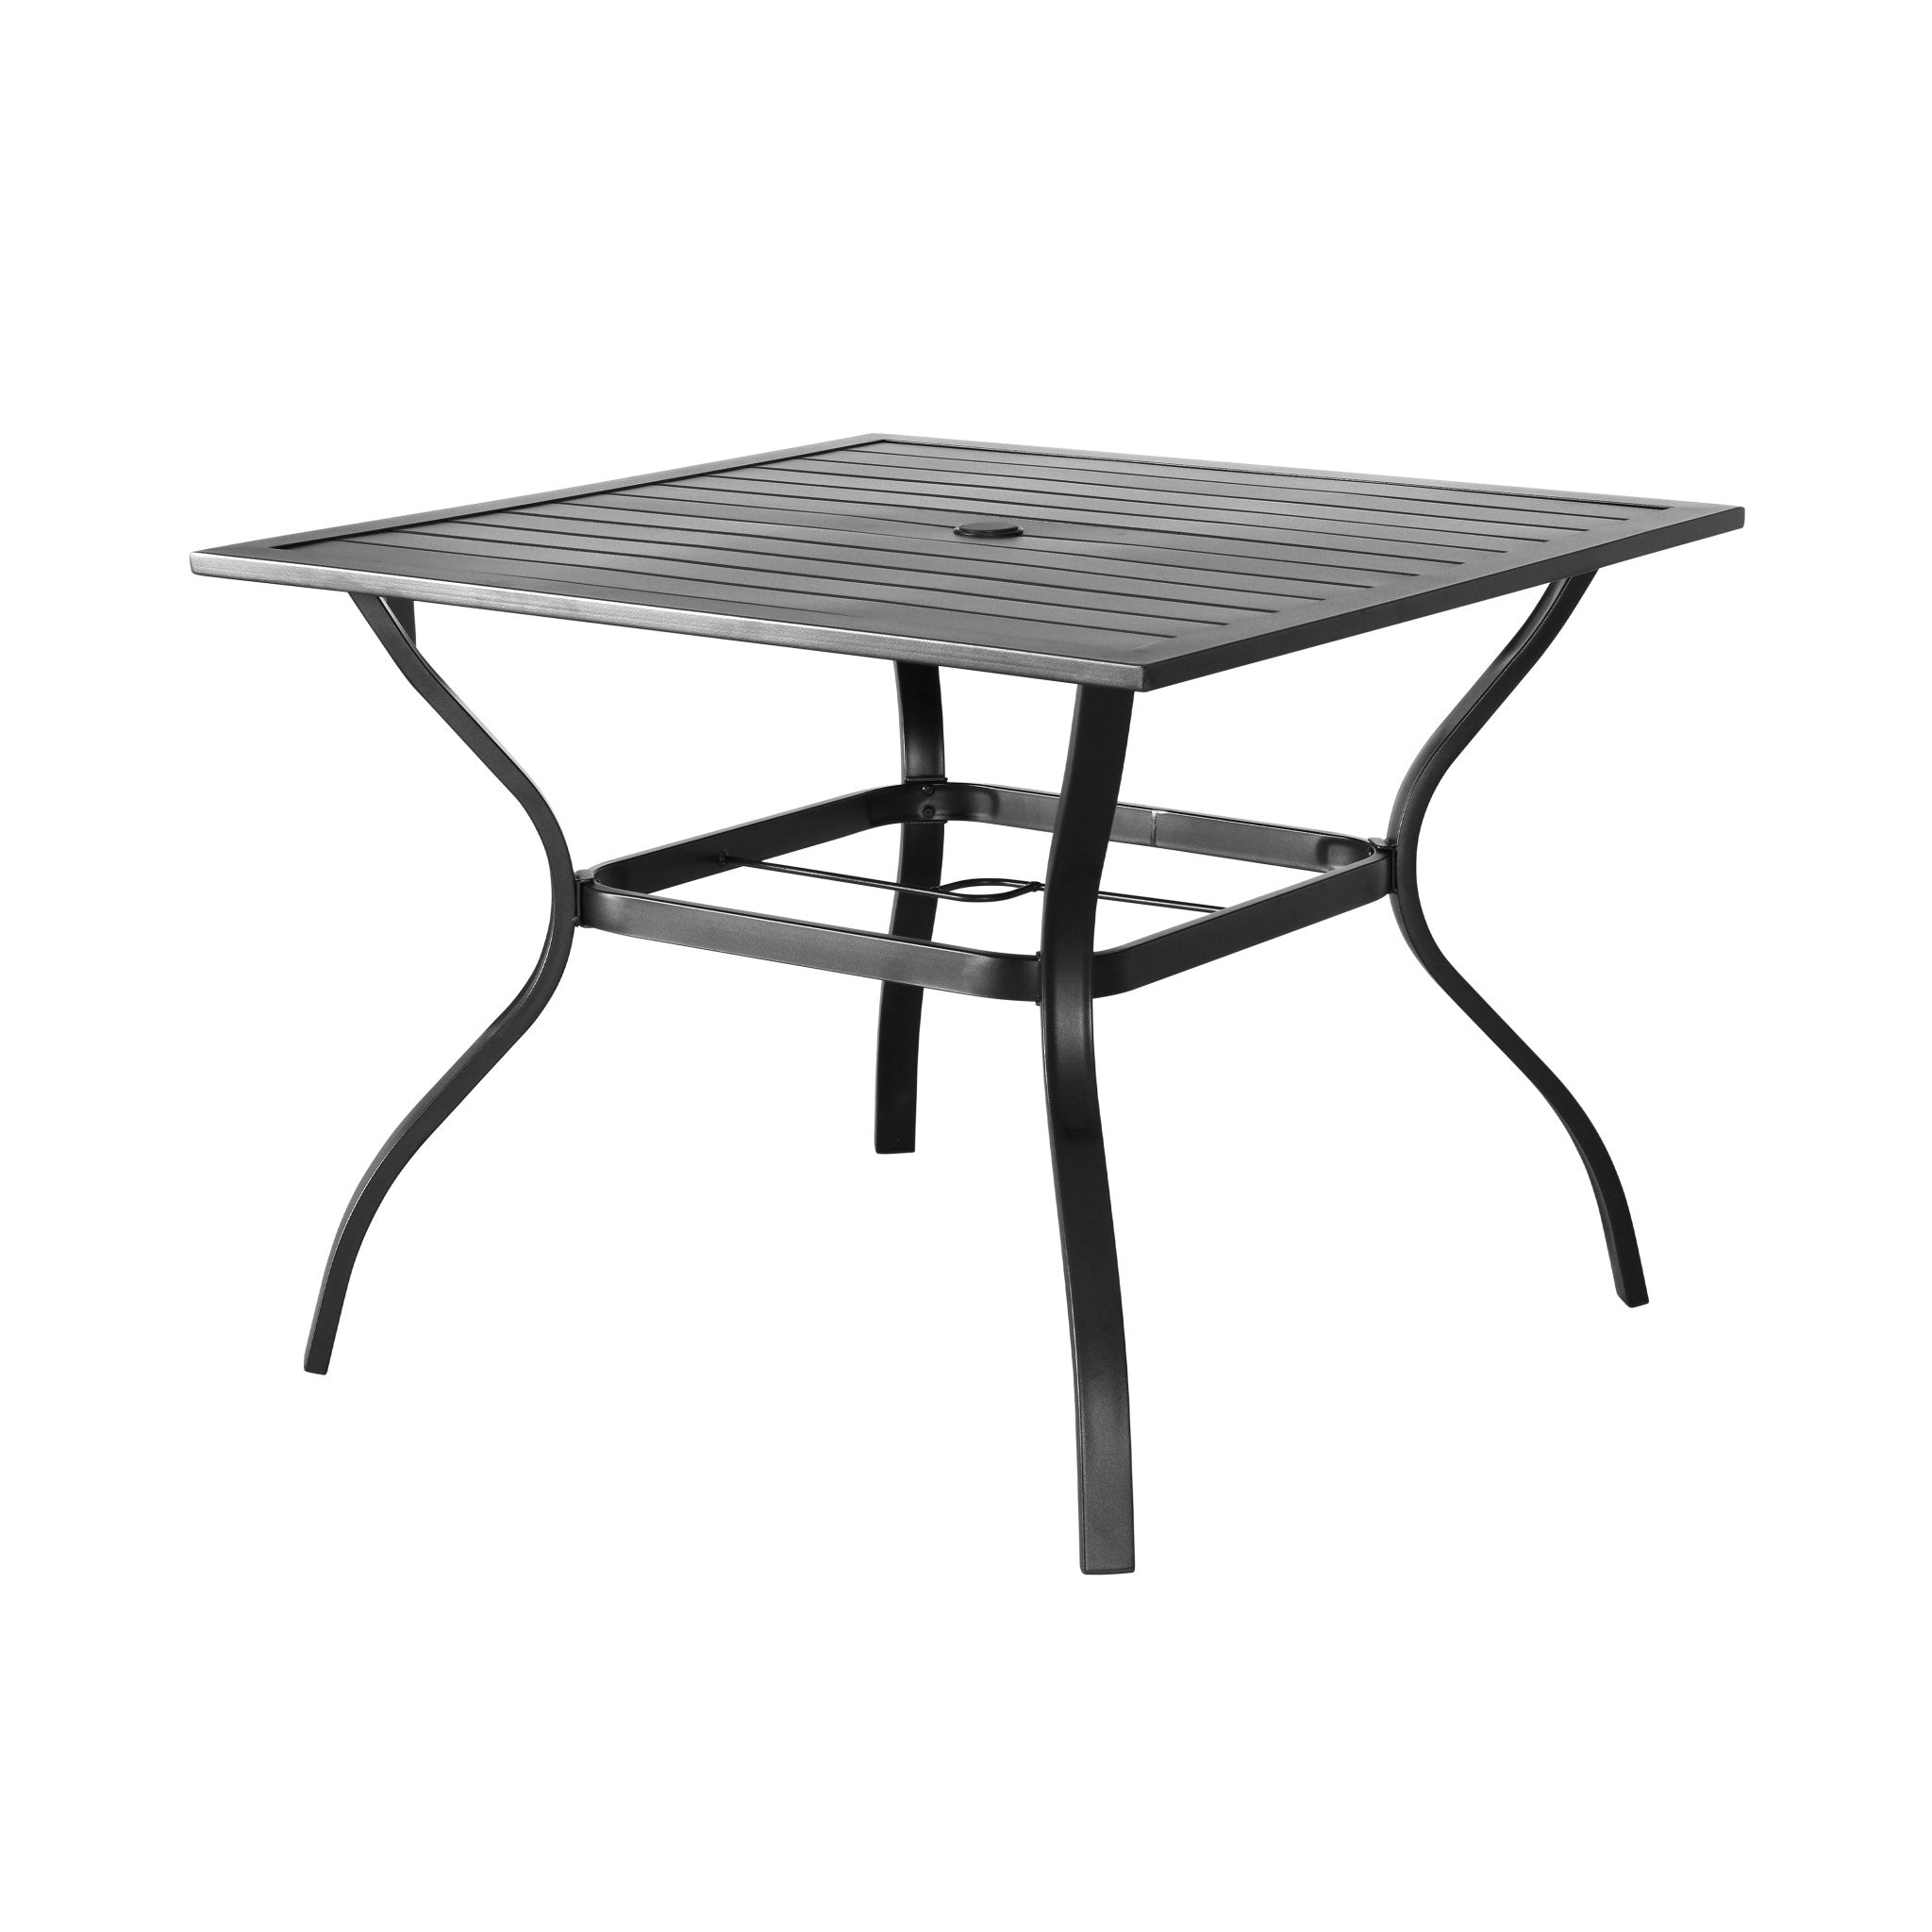 37" Black Square Metal Outdoor Dining Table With Umbrella Hole